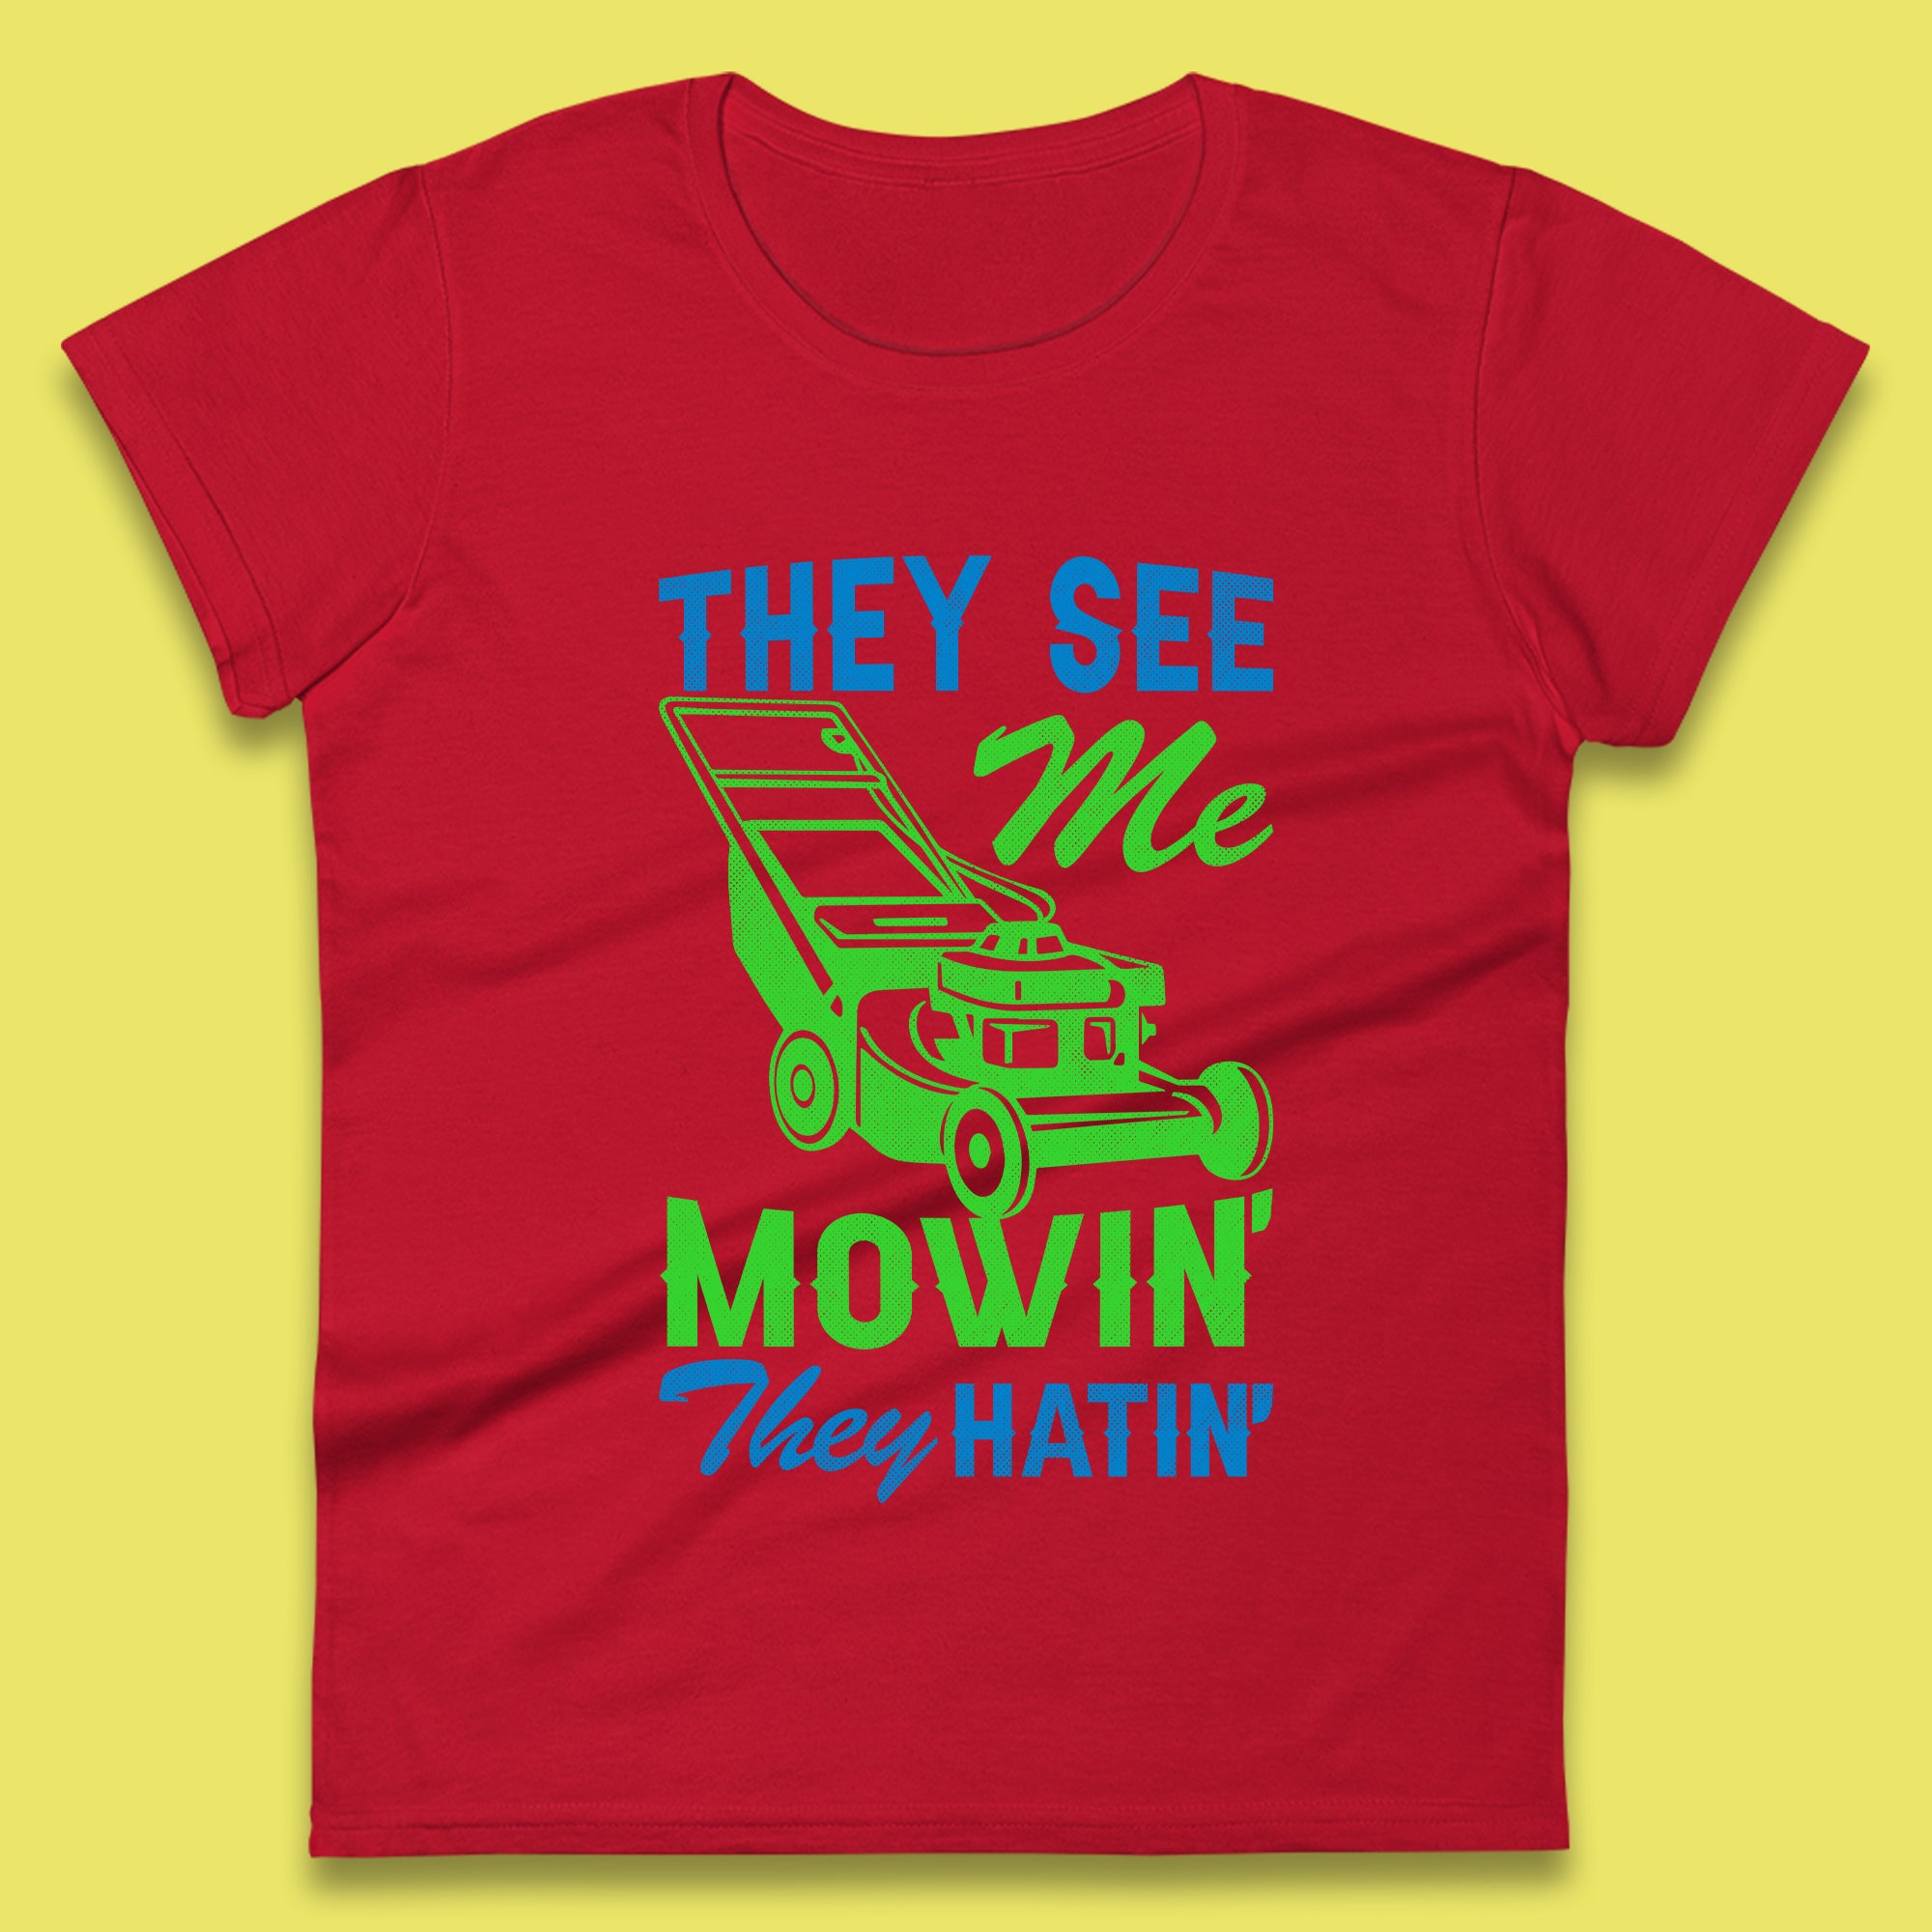 They See Me Mowin They Hatin Womens T-Shirt